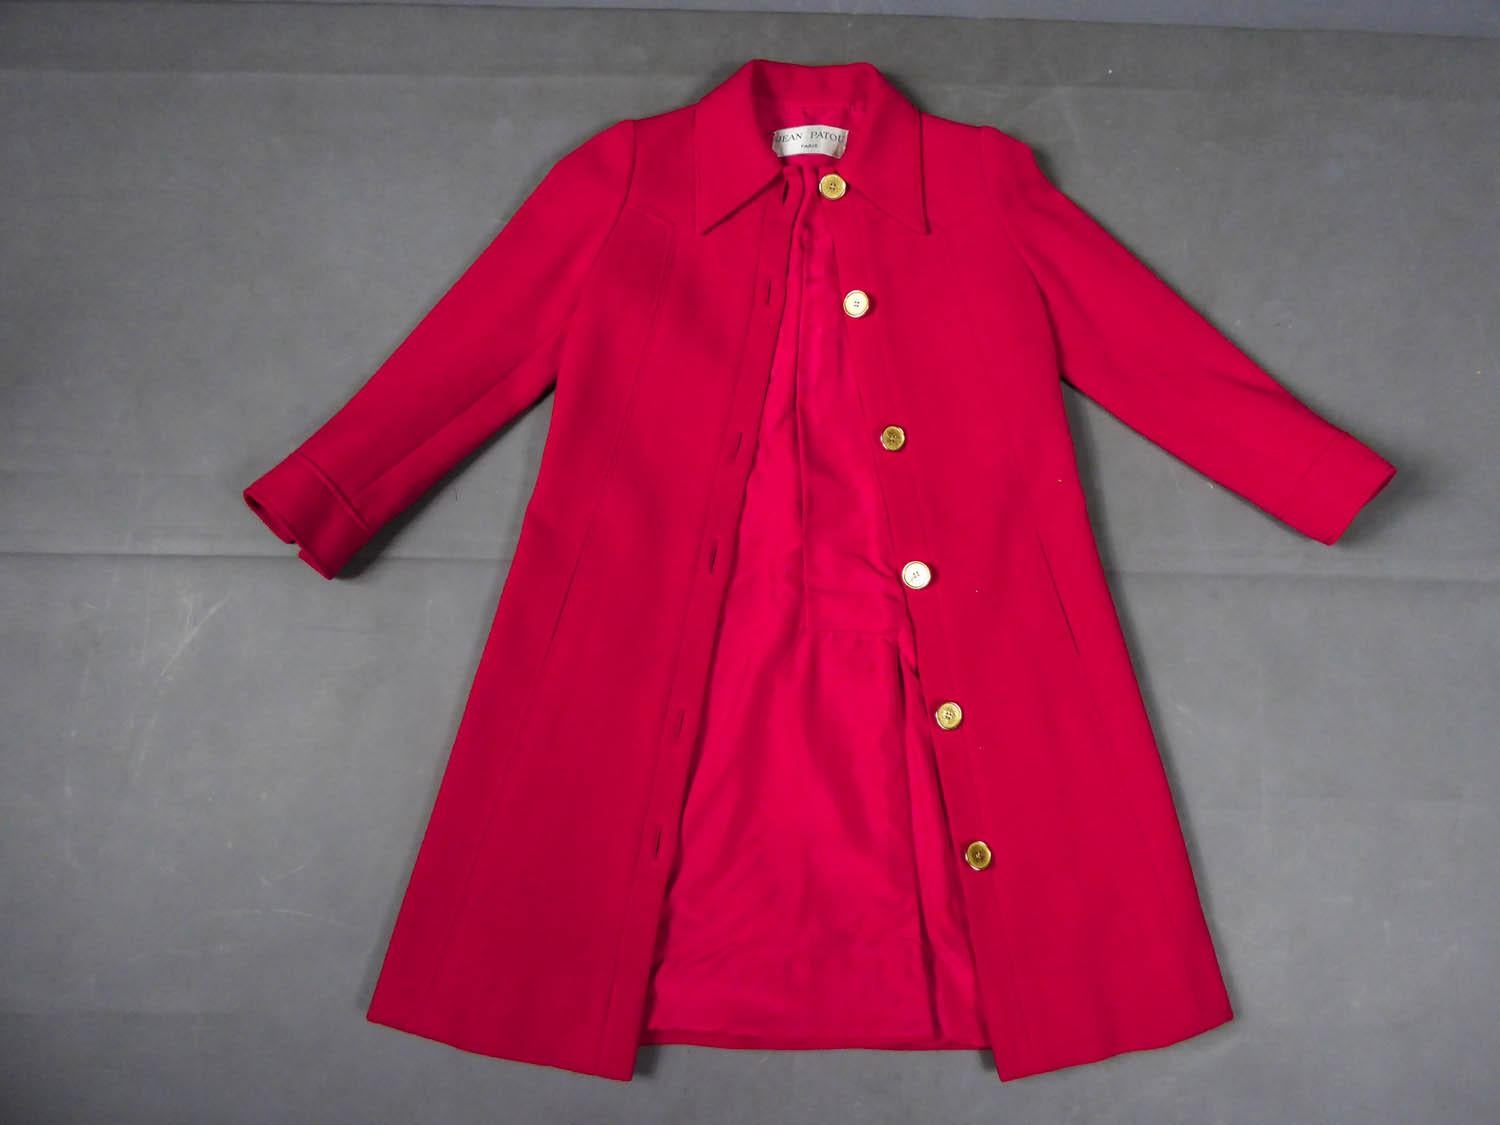 Circa 1970
France

Jean Patou coat in vermilion red cotton jersey from the 1970s. Pyramidal cut, small collar with wide tabs and two pockets at the front. Elegance of the coat emphasized by topstitching at the collar, back and chest. Front closure